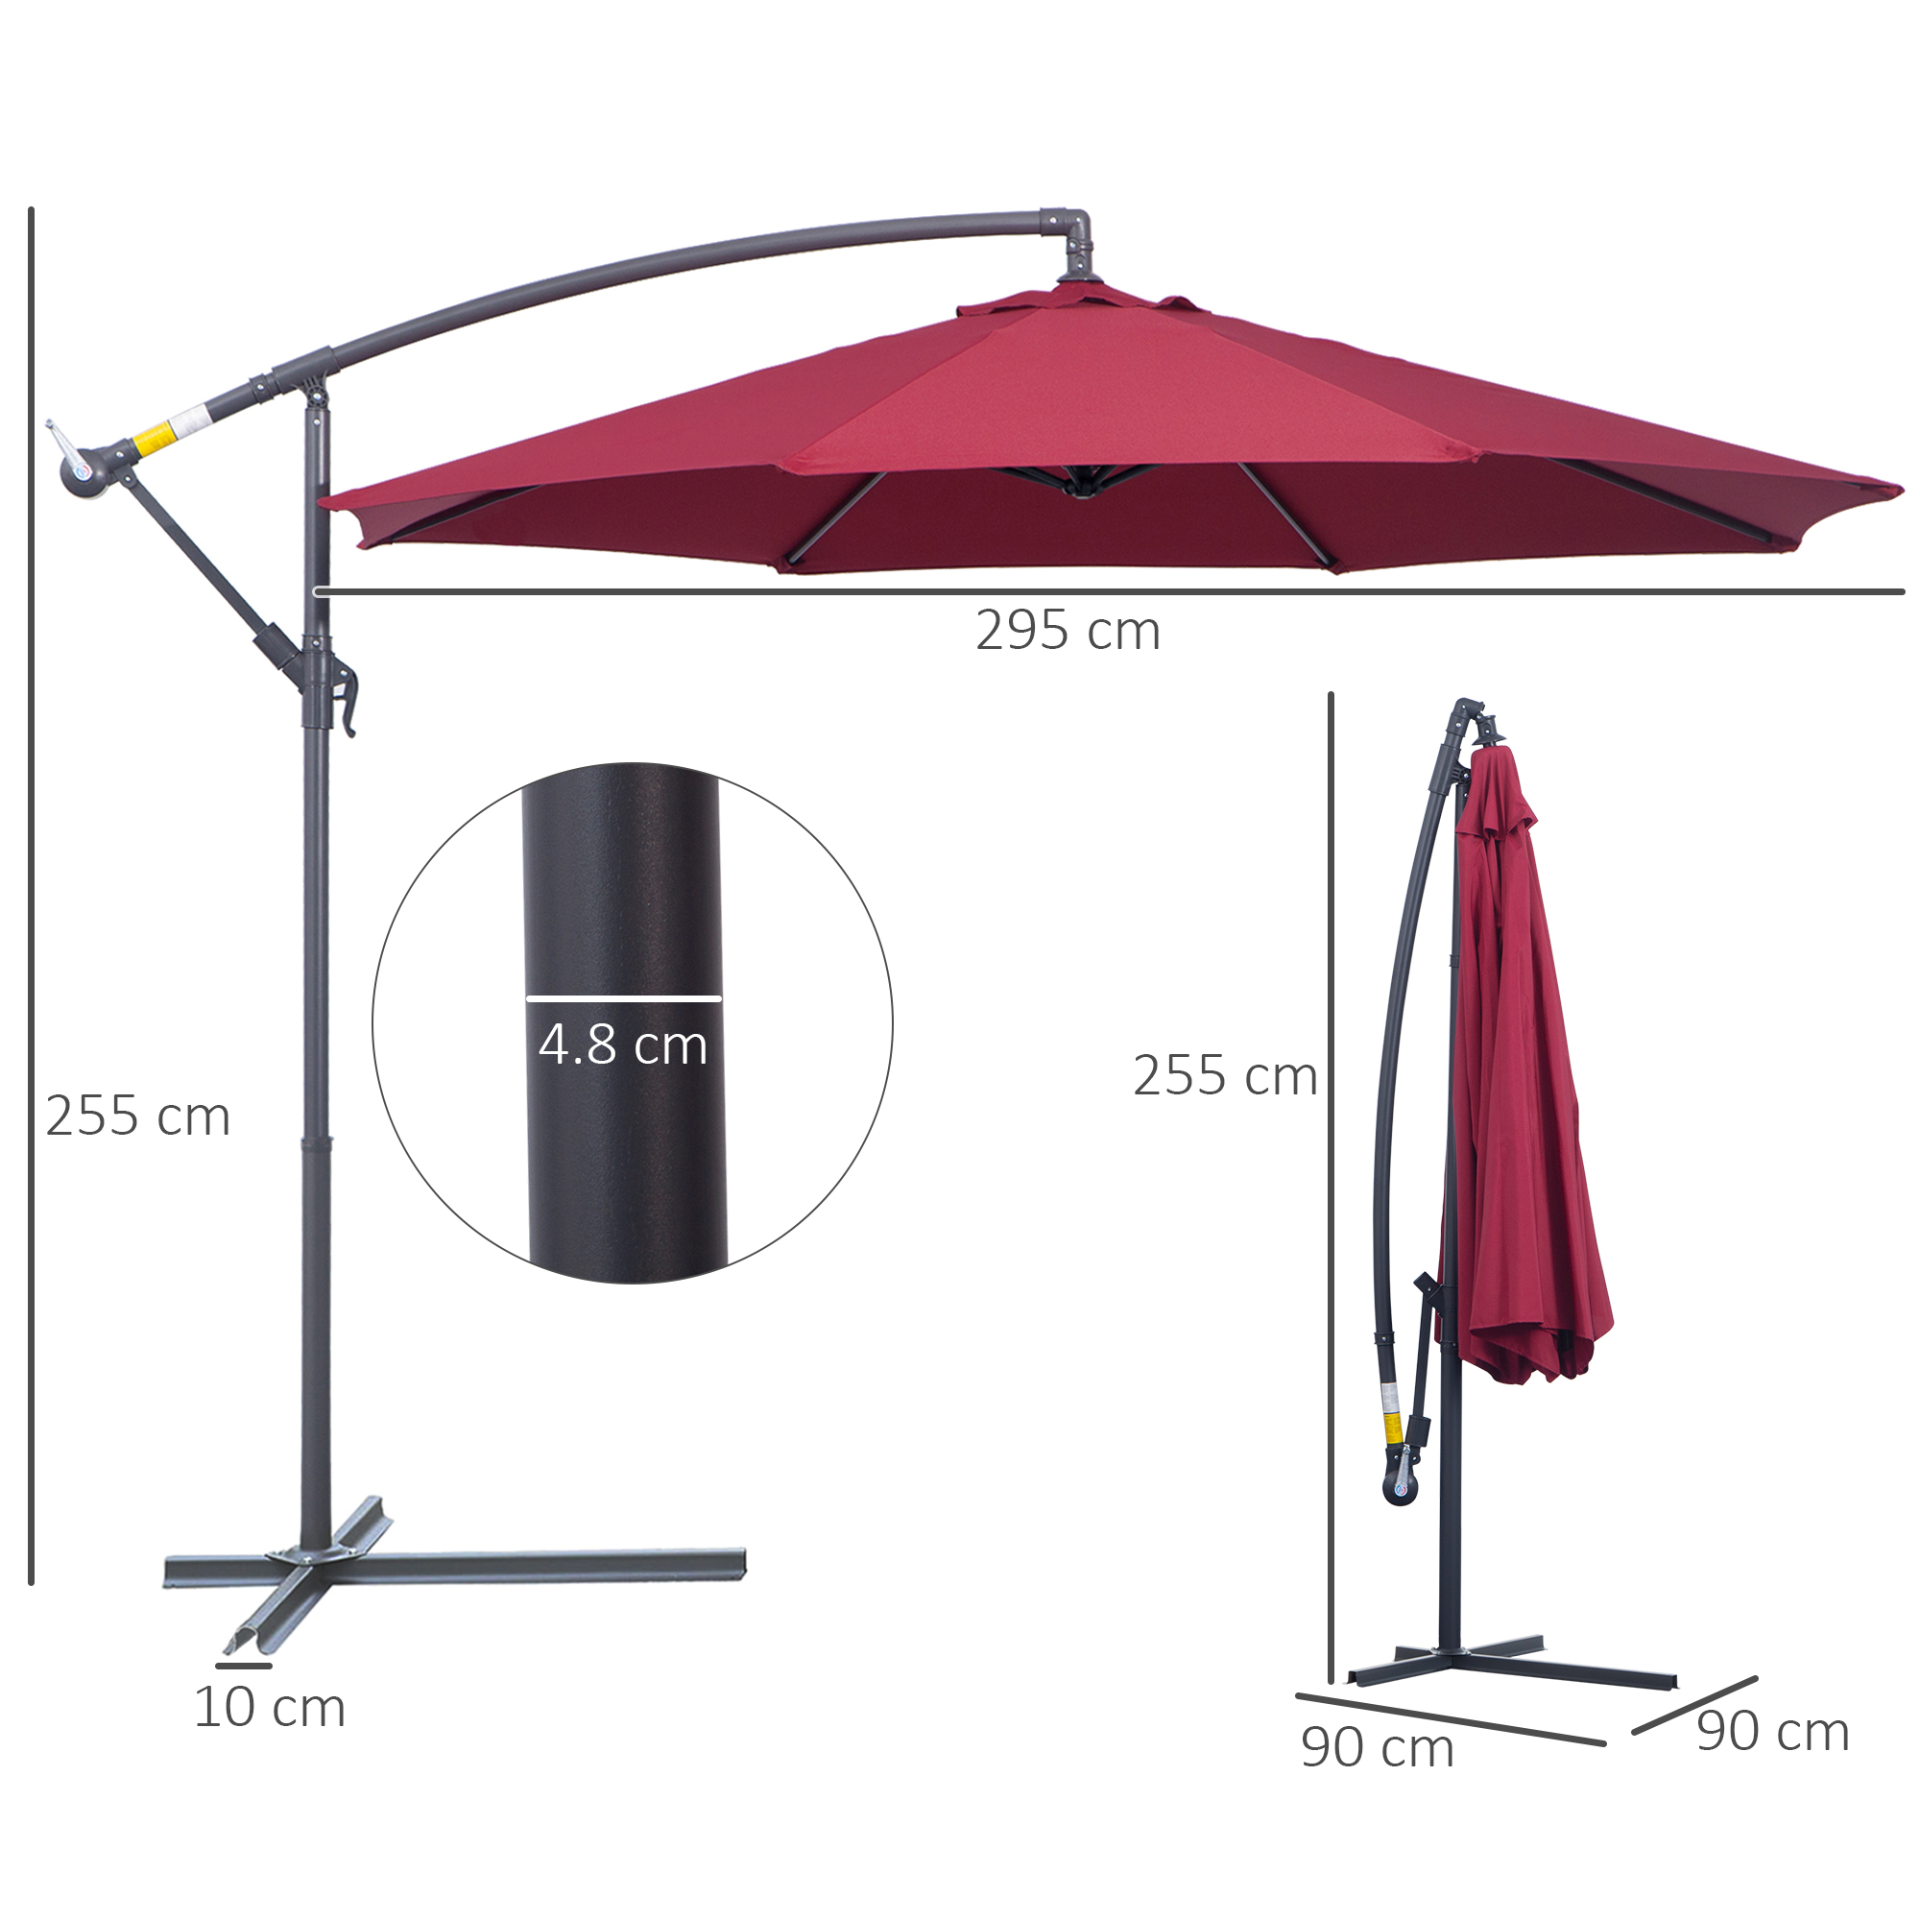 Outsunny 3(m) Garden Banana Parasol Hanging Cantilever Umbrella with Crank Handle and Cross Base for Outdoor, Sun Shade, Wine Red